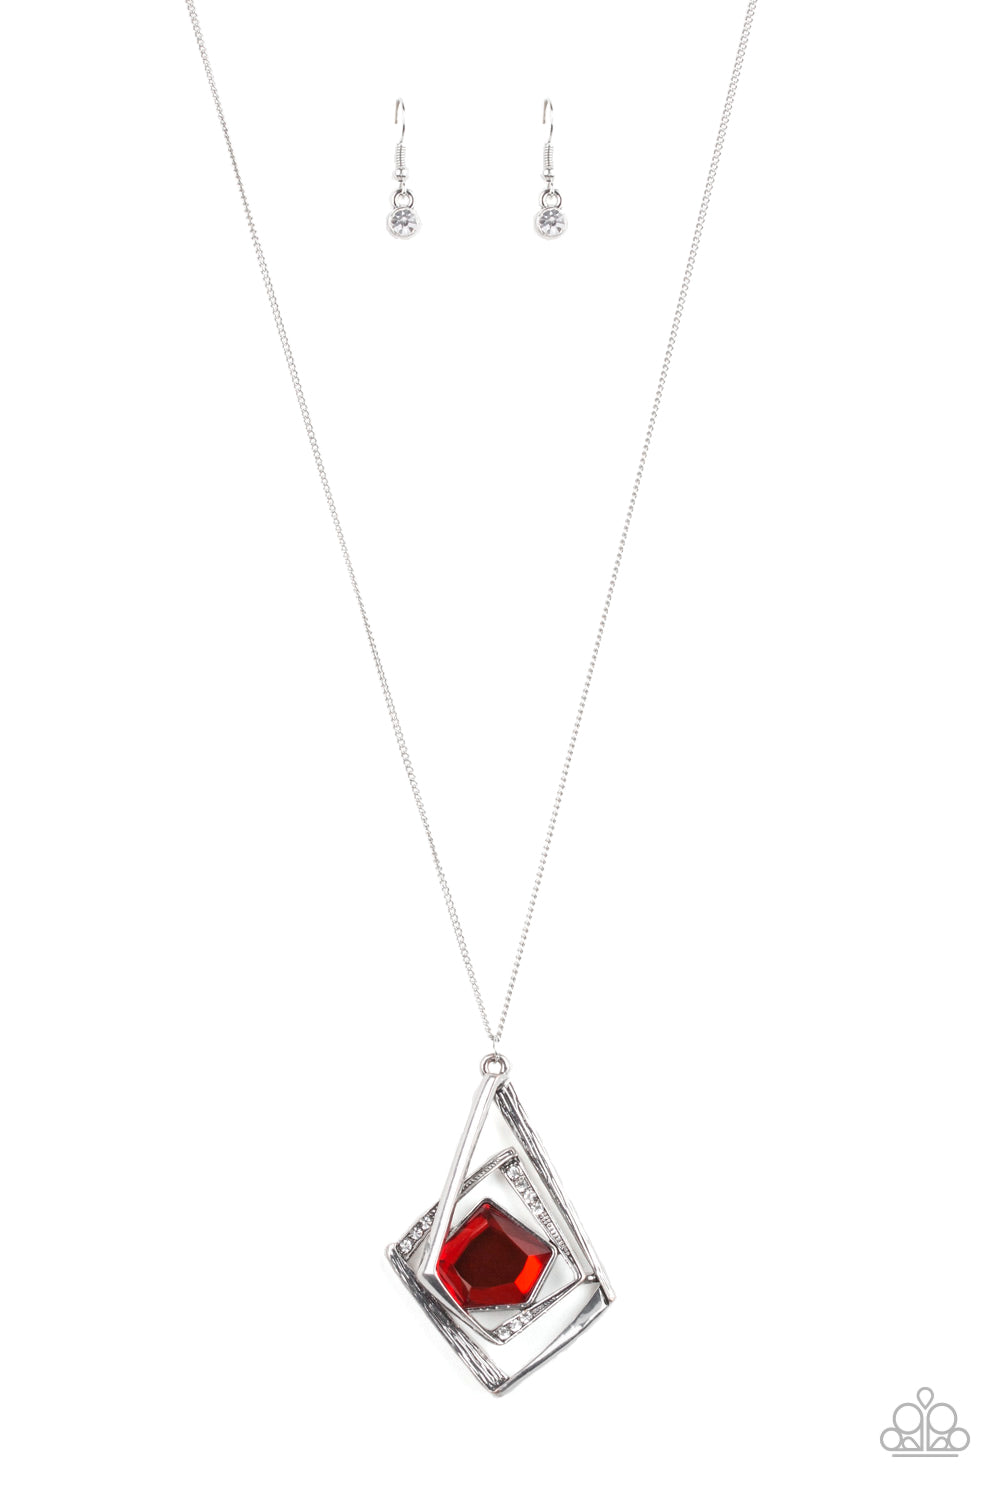 Paparazzi Accessories - A MODERN Citizen - Red Necklace